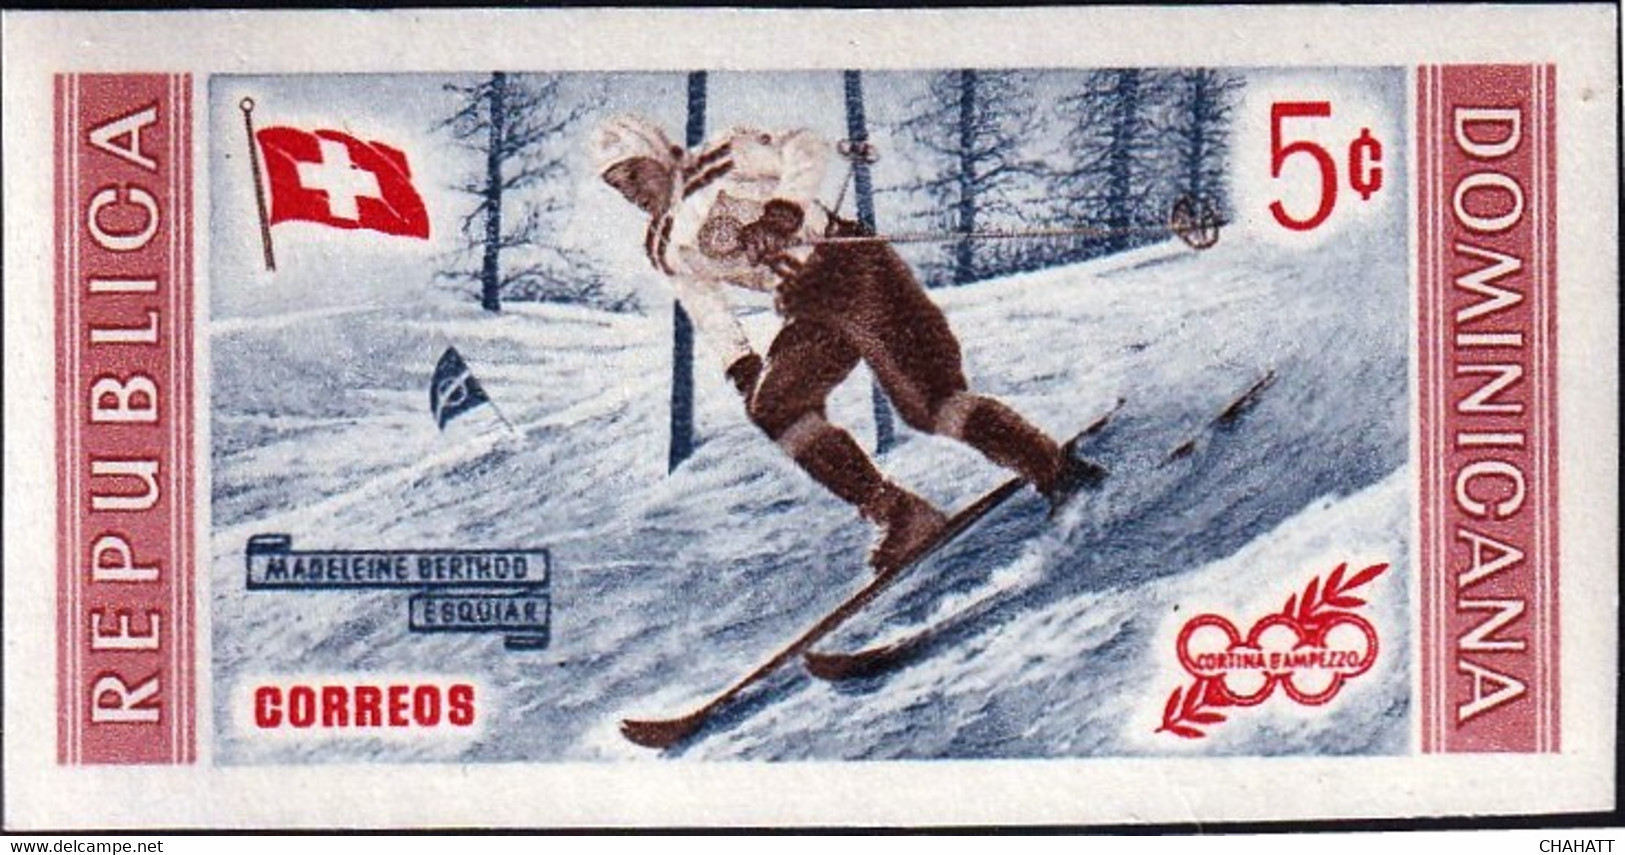 WINTER OLYMPICS-1956-SKIING-PERF & IMPERF-DOMINICANA-MNH-A4-535 - Inverno1956: Cortina D'Ampezzo